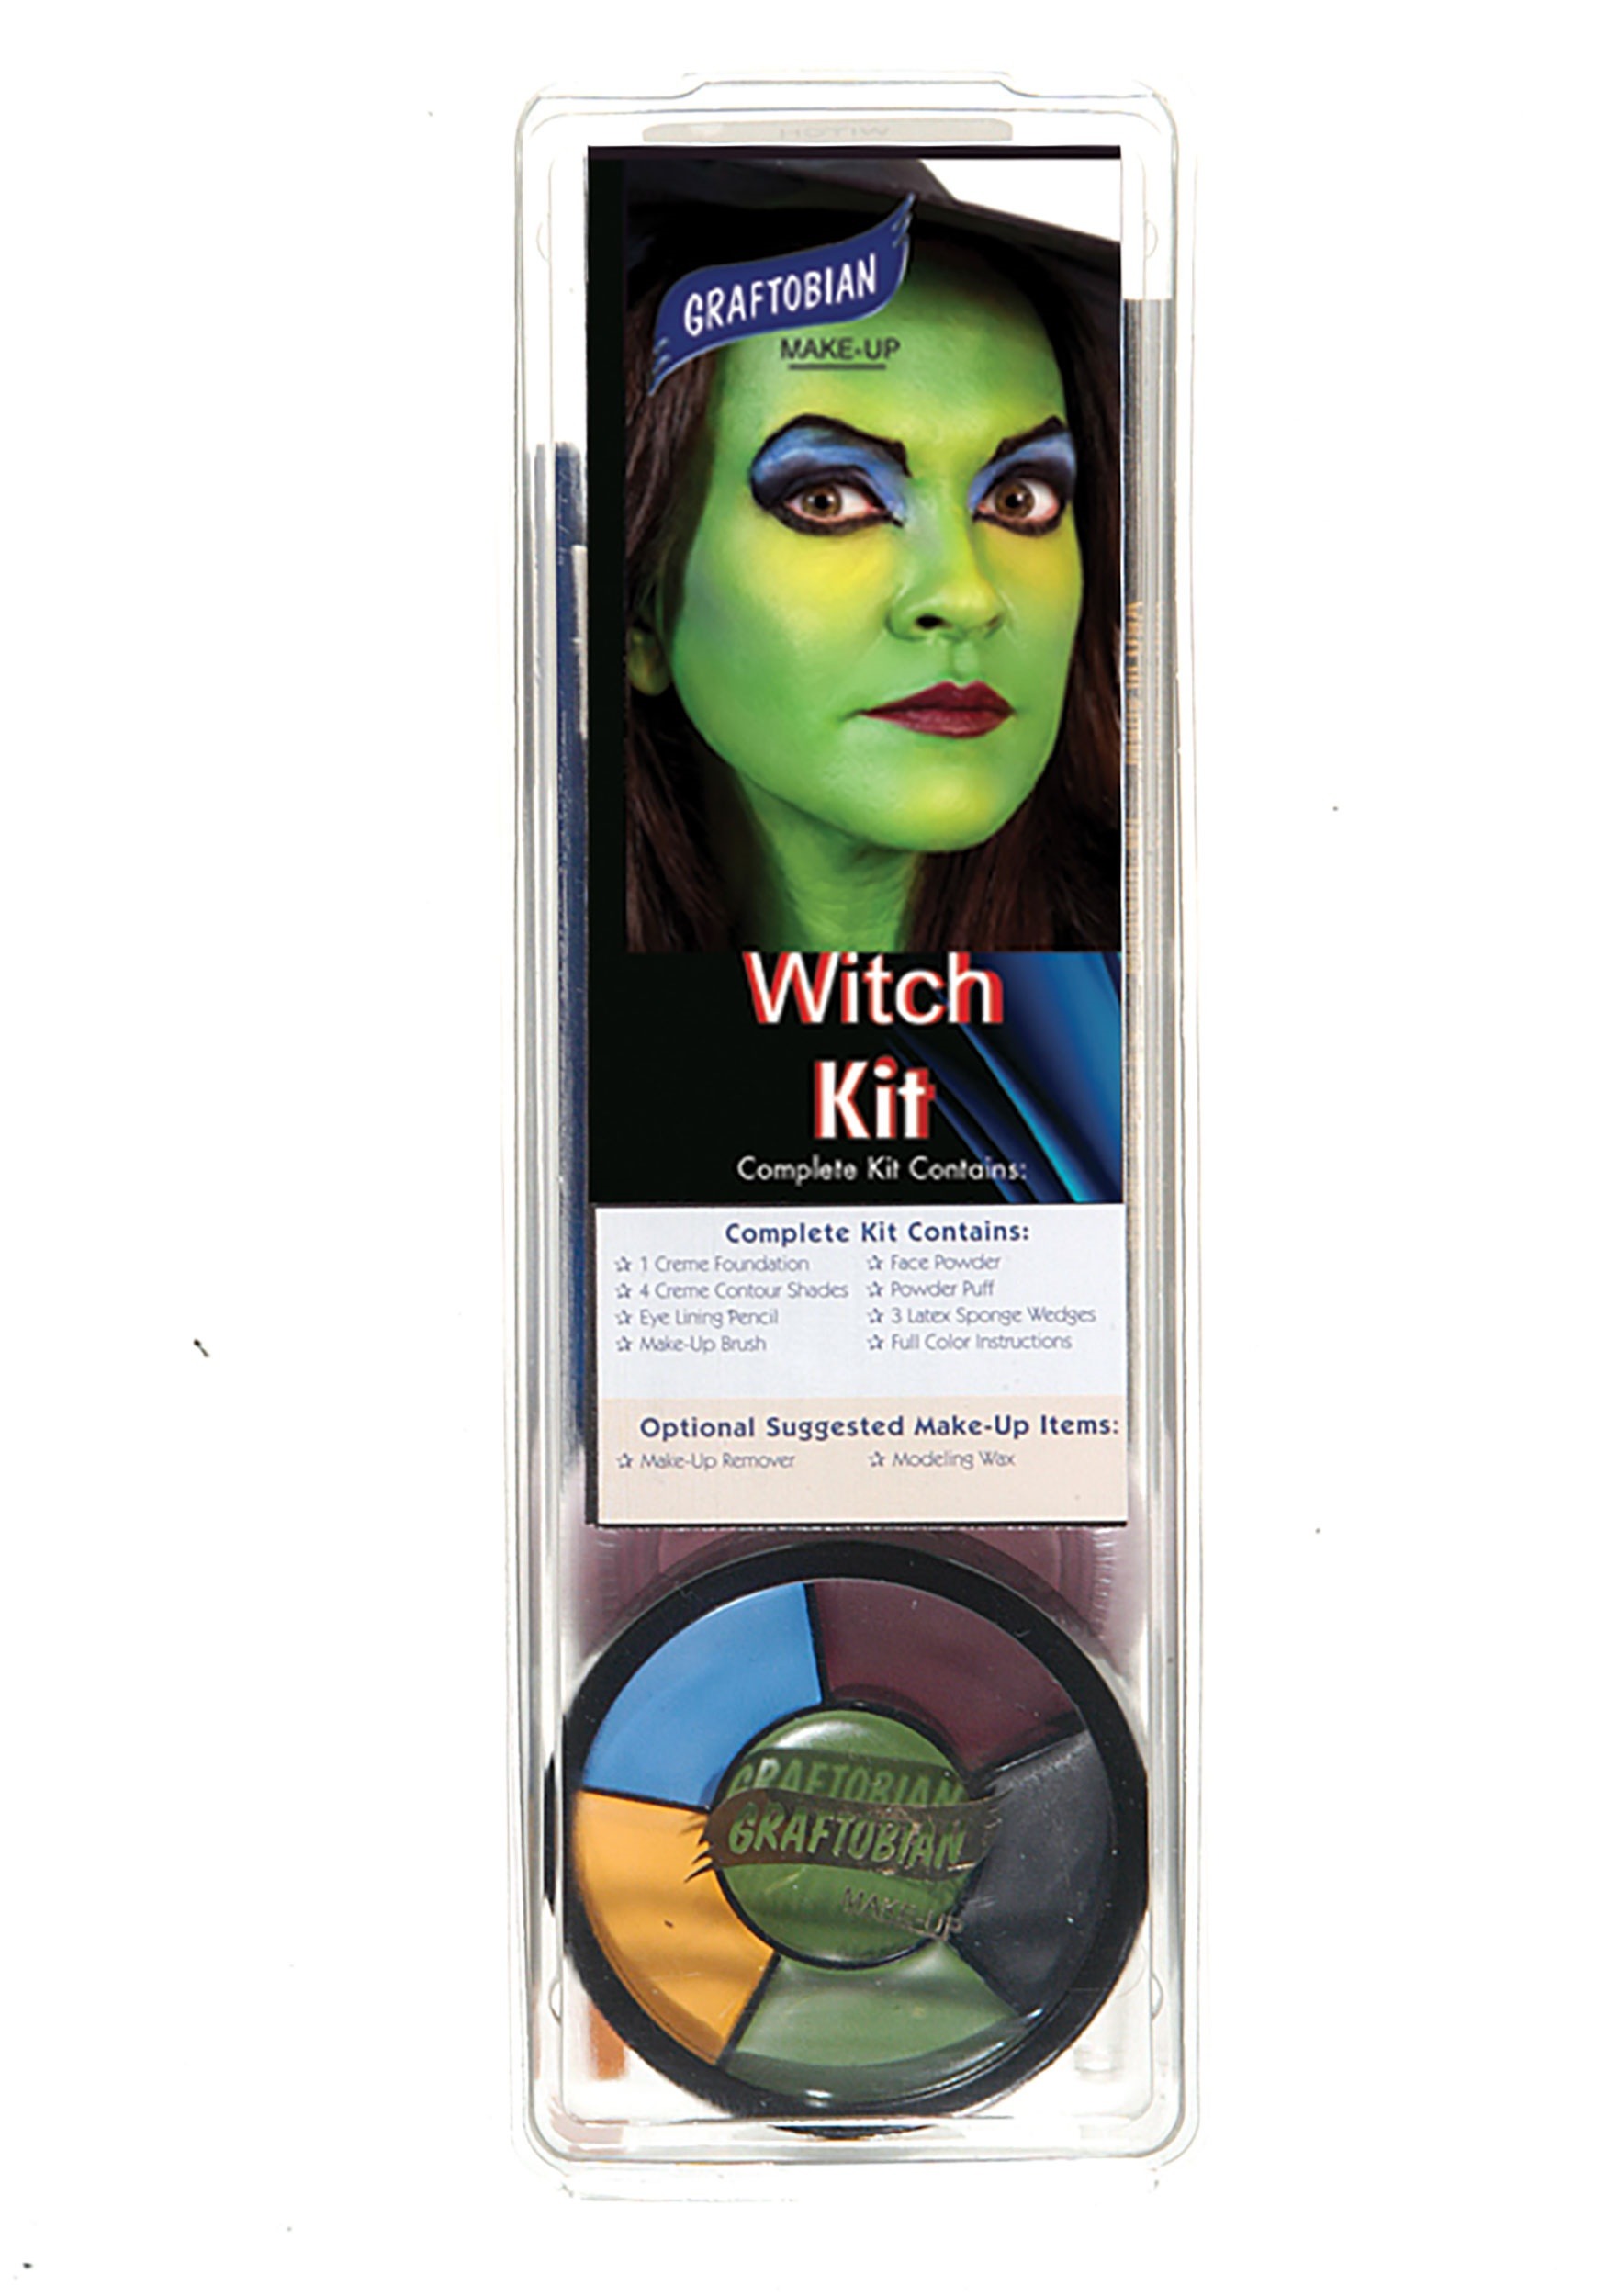 Graftobian Deluxe Witch Face Makeup Kit